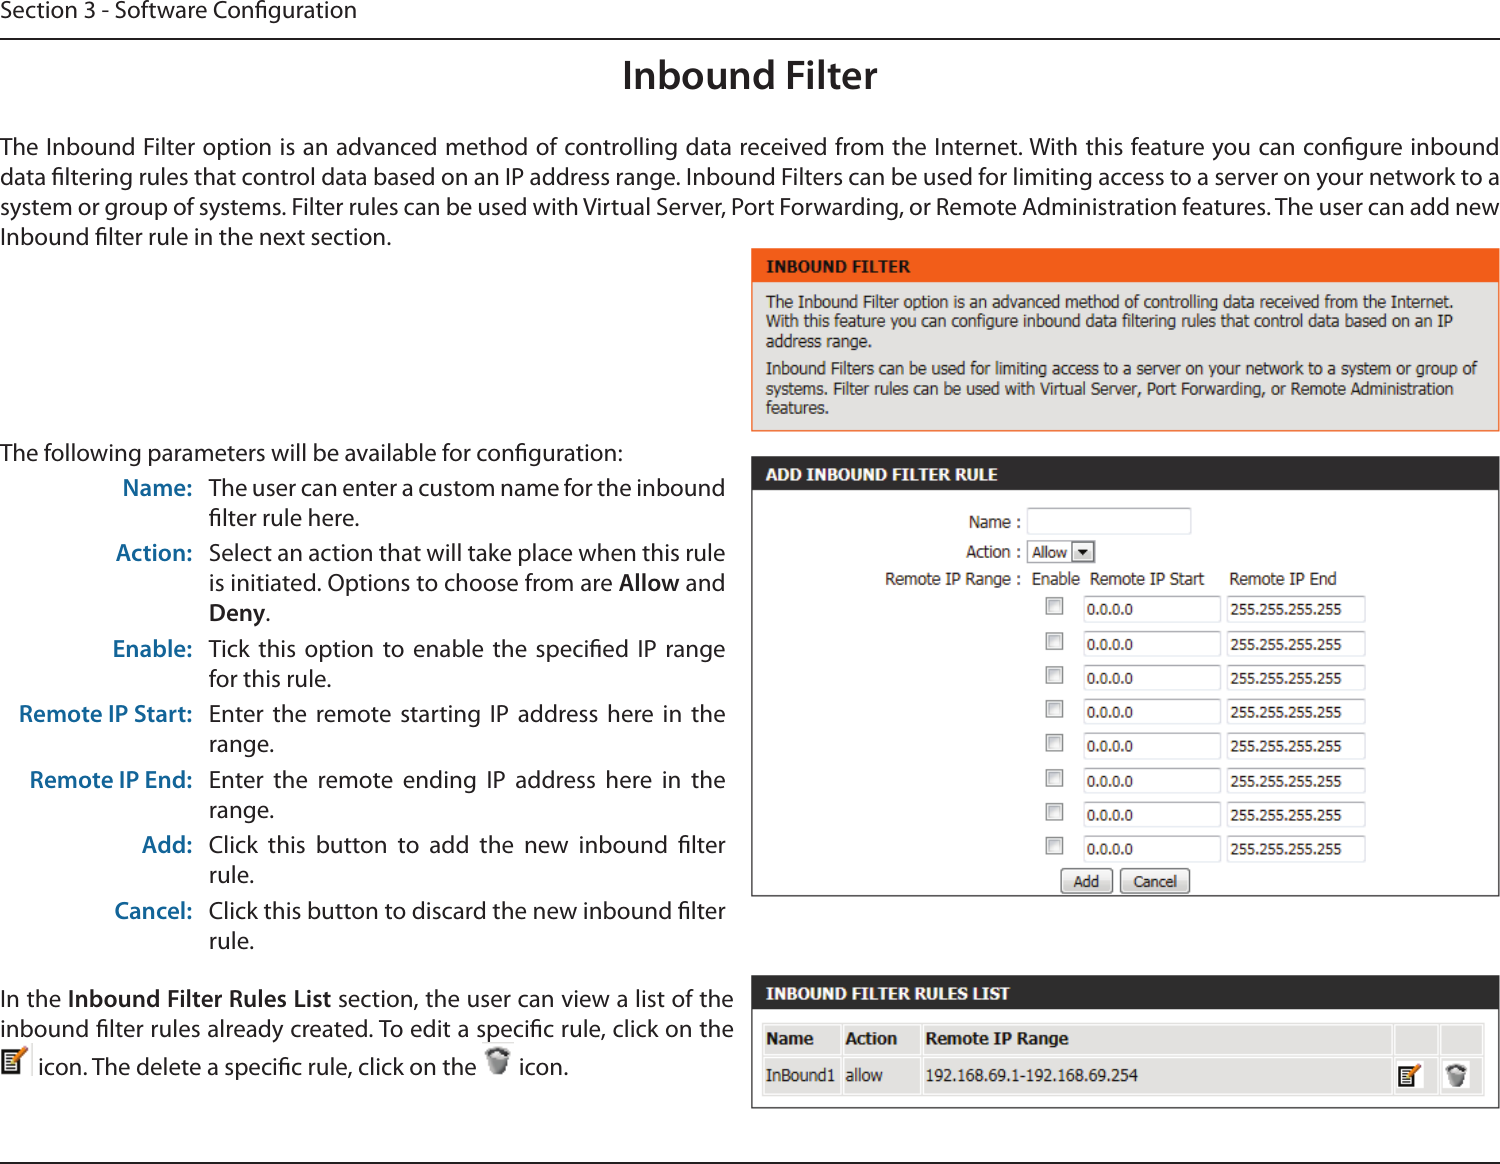 Section 3 - Software CongurationInbound FilterThe Inbound Filter option is an advanced method of controlling data received from the Internet. With this feature you can congure inbound data ltering rules that control data based on an IP address range. Inbound Filters can be used for limiting access to a server on your network to a system or group of systems. Filter rules can be used with Virtual Server, Port Forwarding, or Remote Administration features. The user can add new Inbound lter rule in the next section.The following parameters will be available for conguration:Name: The user can enter a custom name for the inbound lter rule here.Action: Select an action that will take place when this rule is initiated. Options to choose from are Allow and Deny.Enable: Tick this  option  to  enable  the  specied  IP  range for this rule.Remote IP Start: Enter  the  remote  starting  IP  address  here  in  the range.Remote IP End: Enter  the  remote  ending  IP  address  here  in  the range.Add: Click  this  button  to  add  the  new  inbound  lter rule.Cancel: Click this button to discard the new inbound lter rule.In the Inbound Filter Rules List section, the user can view a list of the inbound lter rules already created. To edit a specic rule, click on the  icon. The delete a specic rule, click on the   icon.